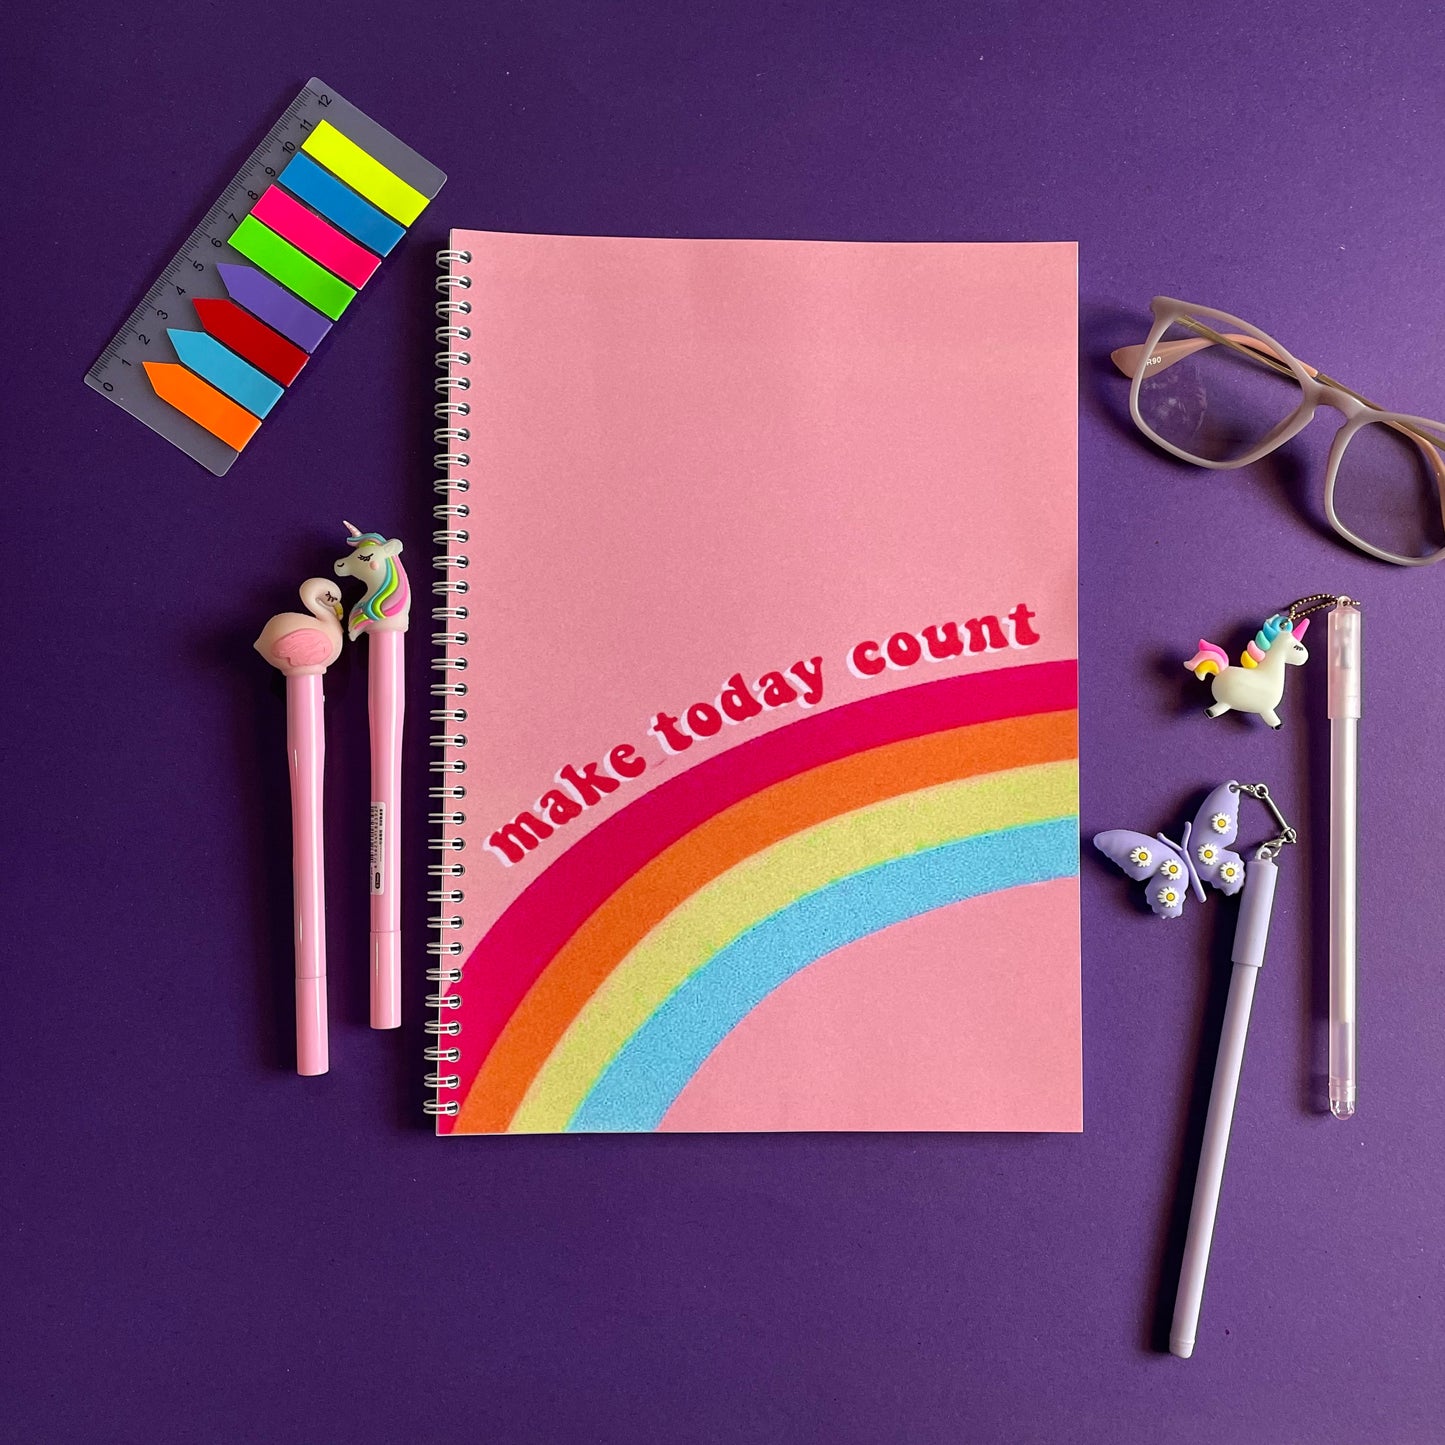 “Make today count” Notebook